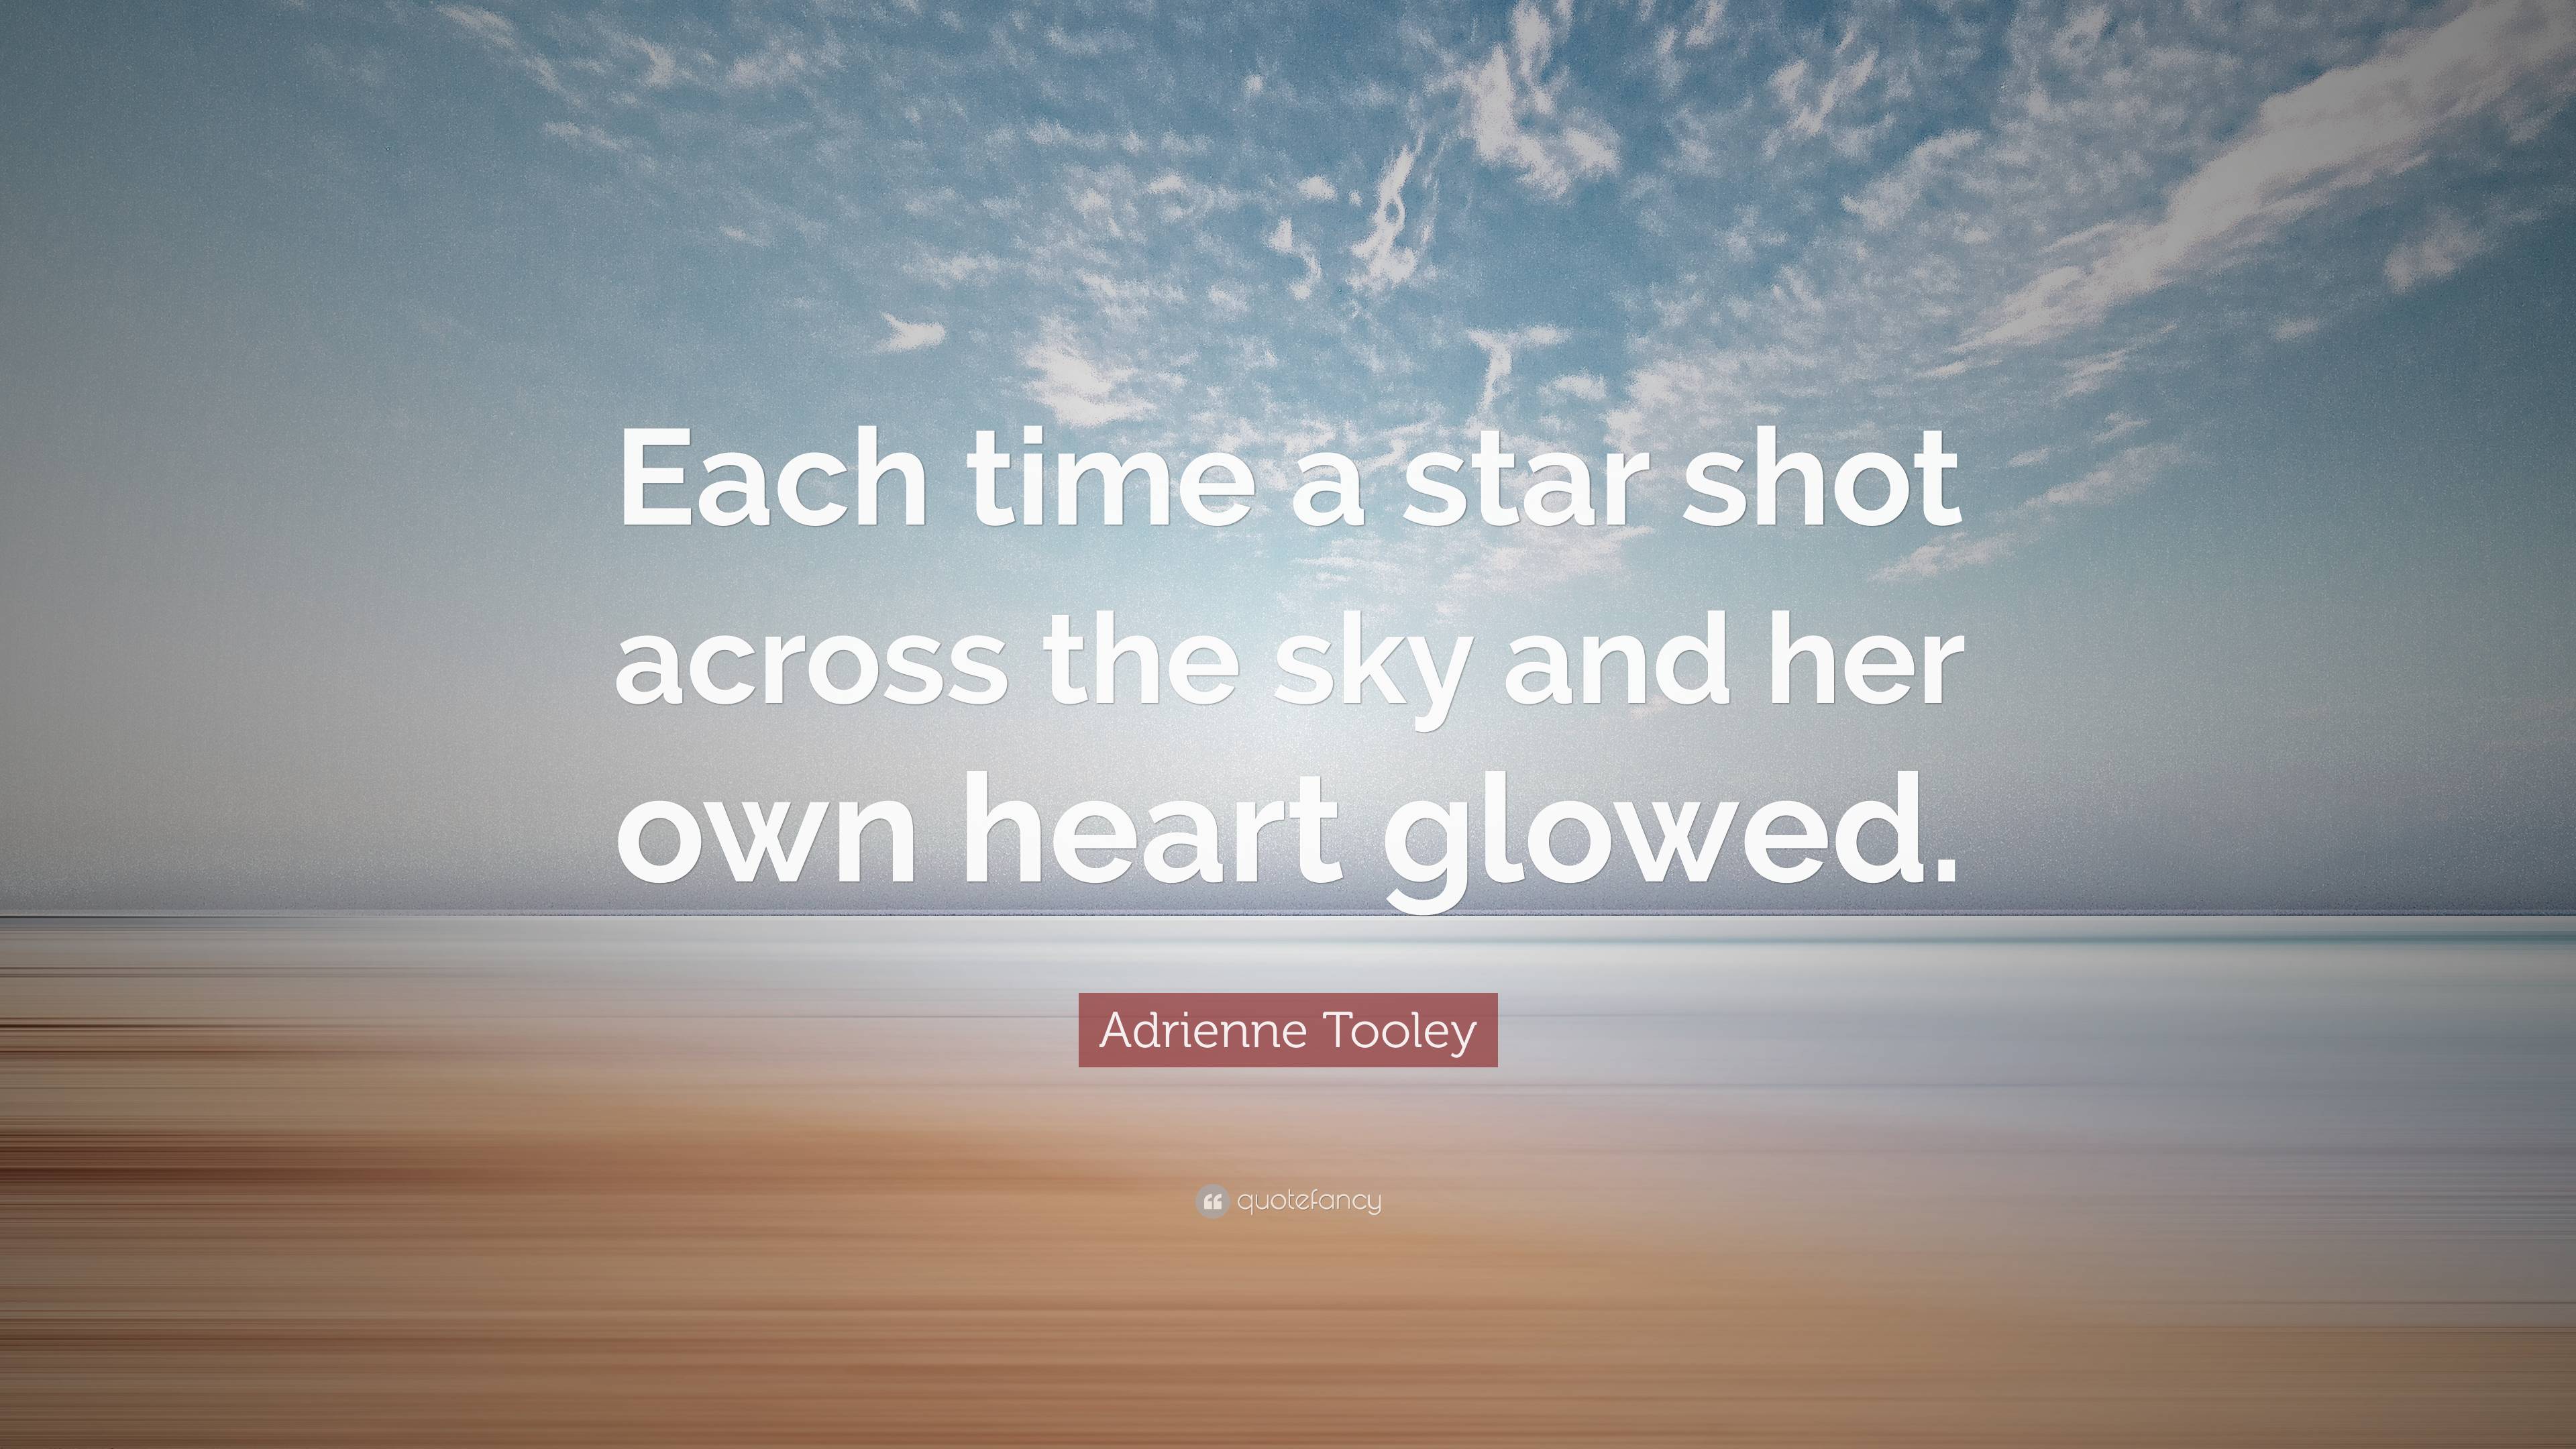 https://quotefancy.com/media/wallpaper/3840x2160/7292760-Adrienne-Tooley-Quote-Each-time-a-star-shot-across-the-sky-and-her.jpg